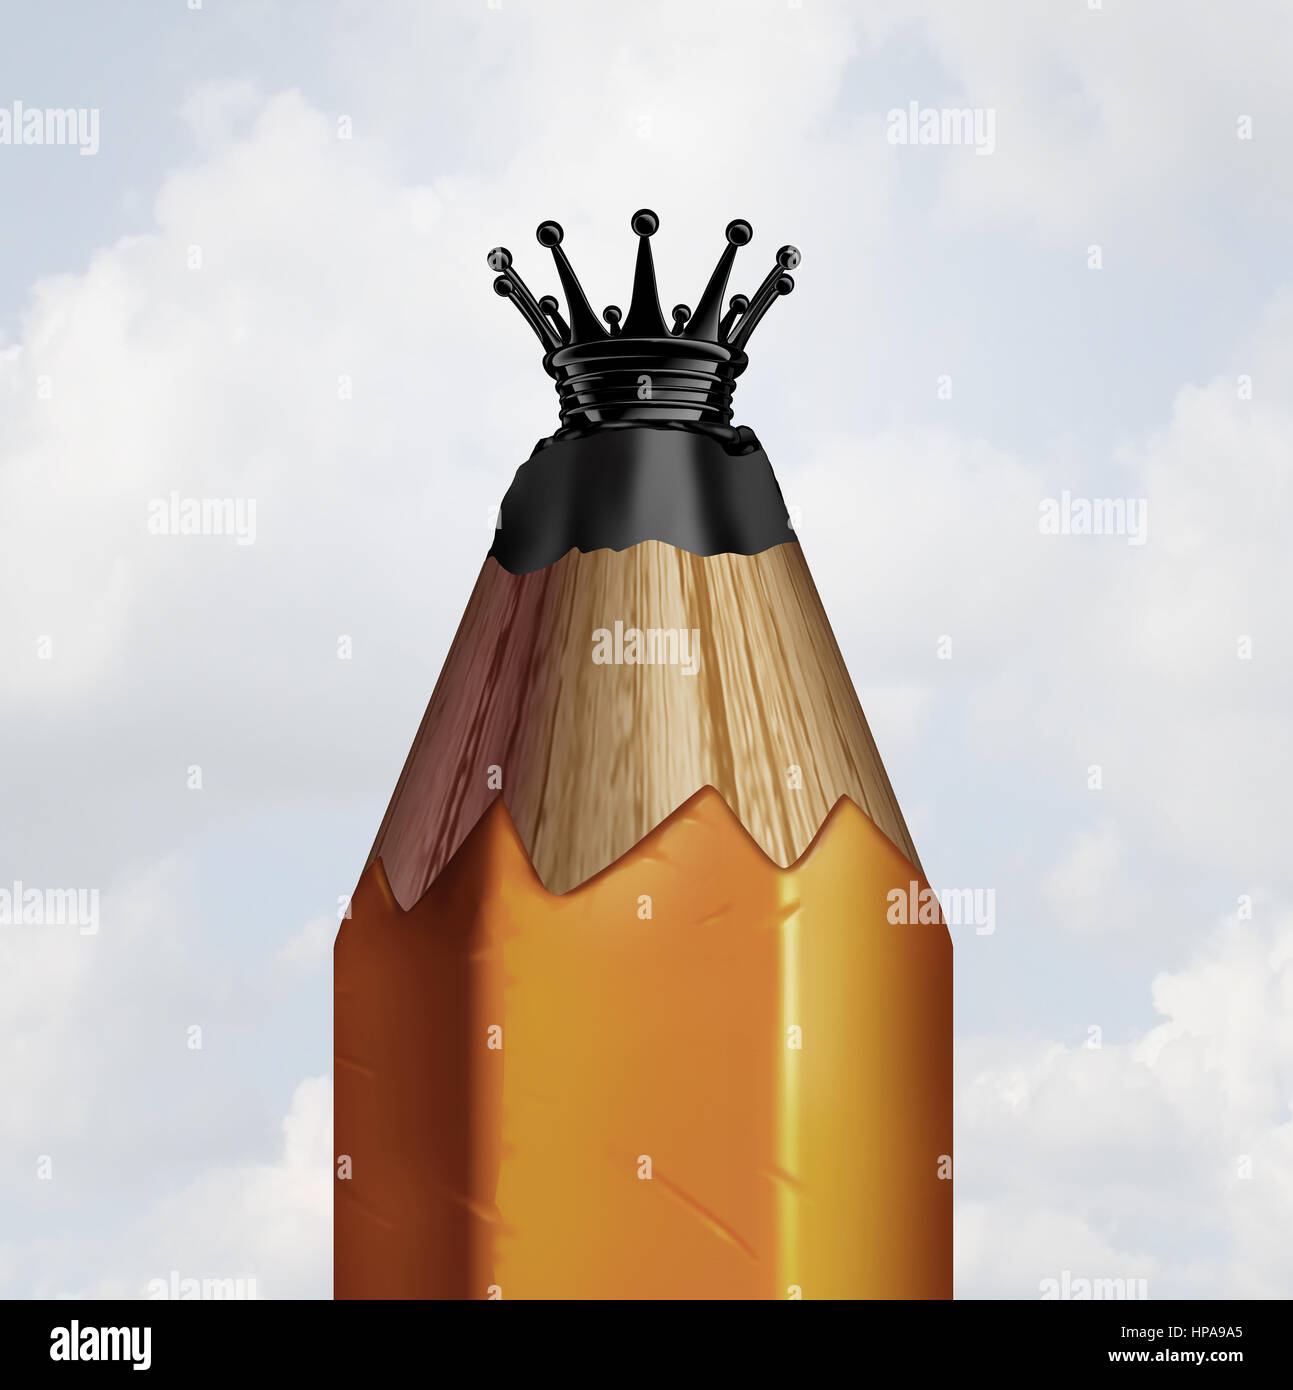 Pencil king concept and idea champion or innovation leader symbol as a pencil shaped as a royal crown as a business and education. Stock Photo